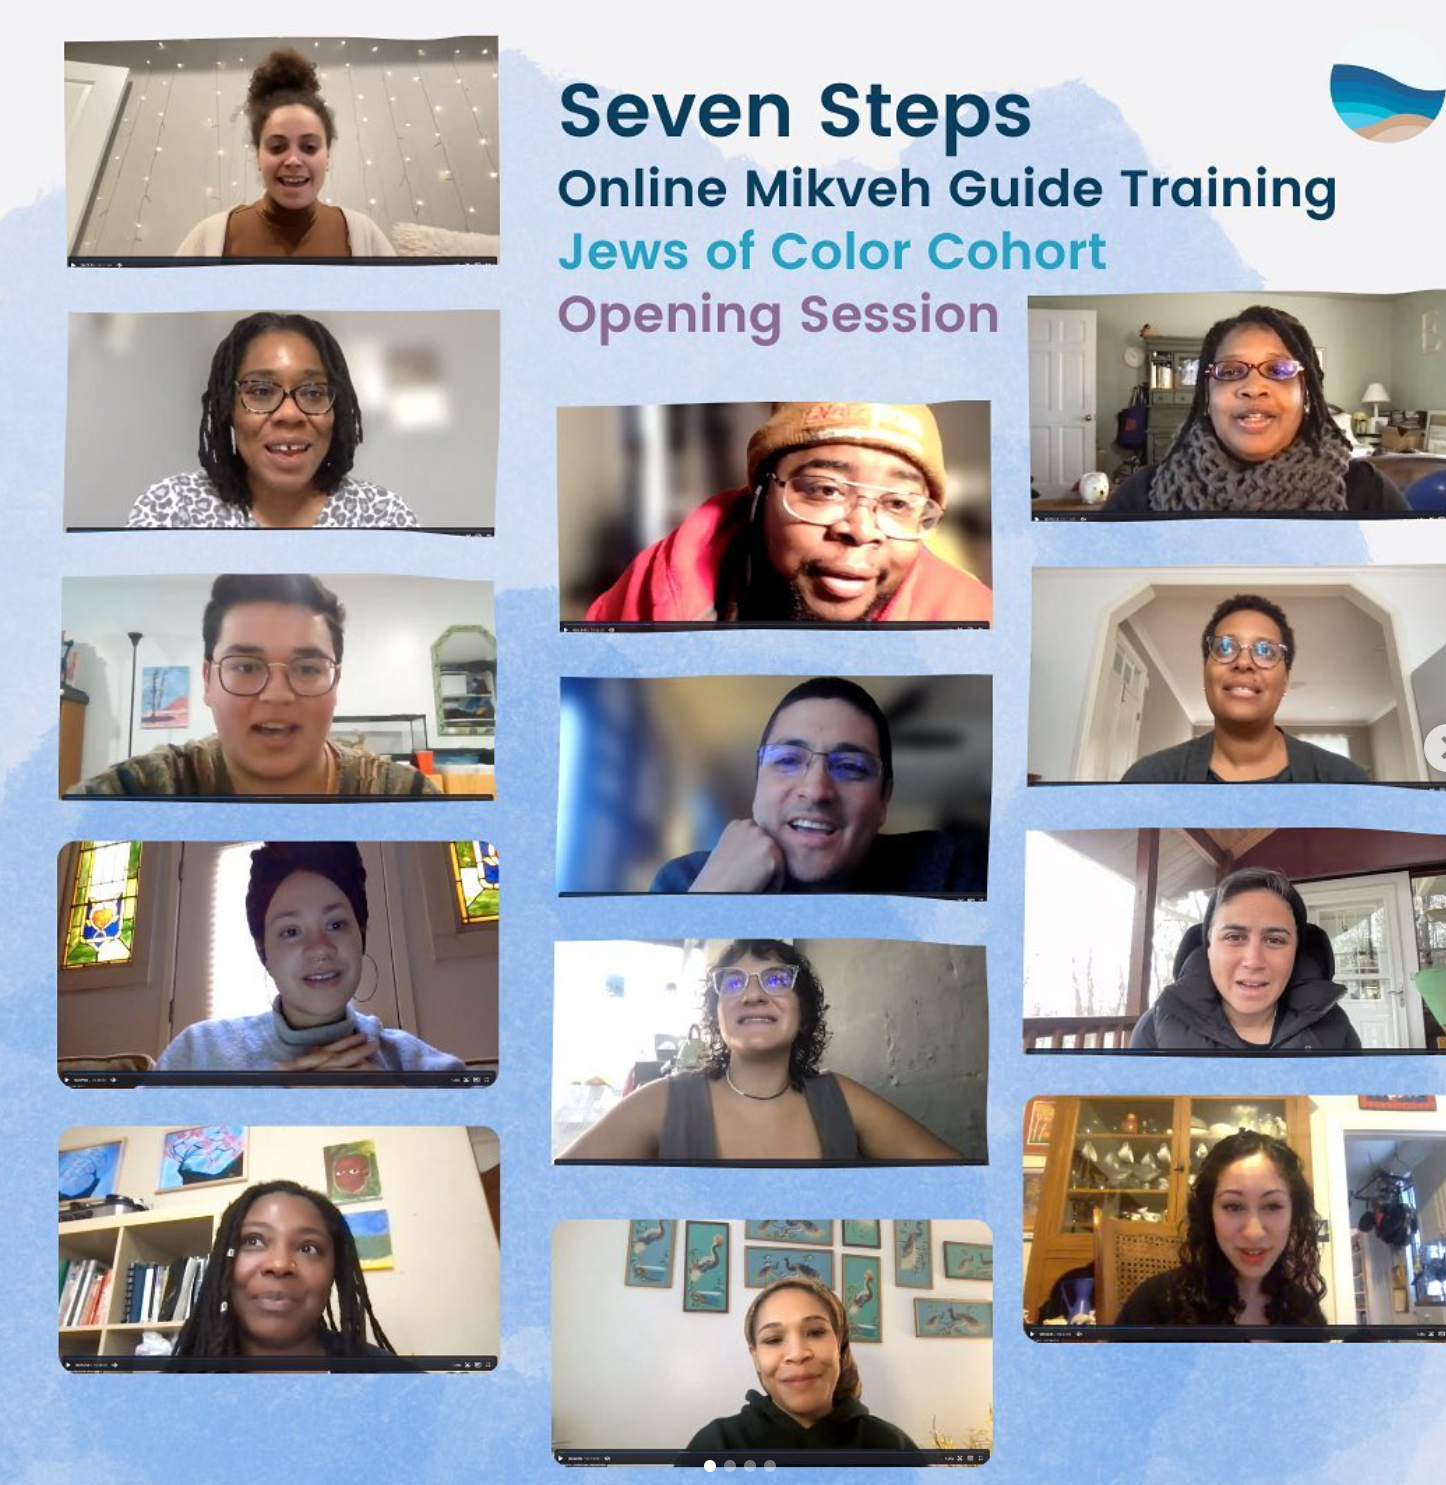 Seven Steps Online Mikveh guide Training Opening session; image shows 13 Jews of Color gathering via Zoom